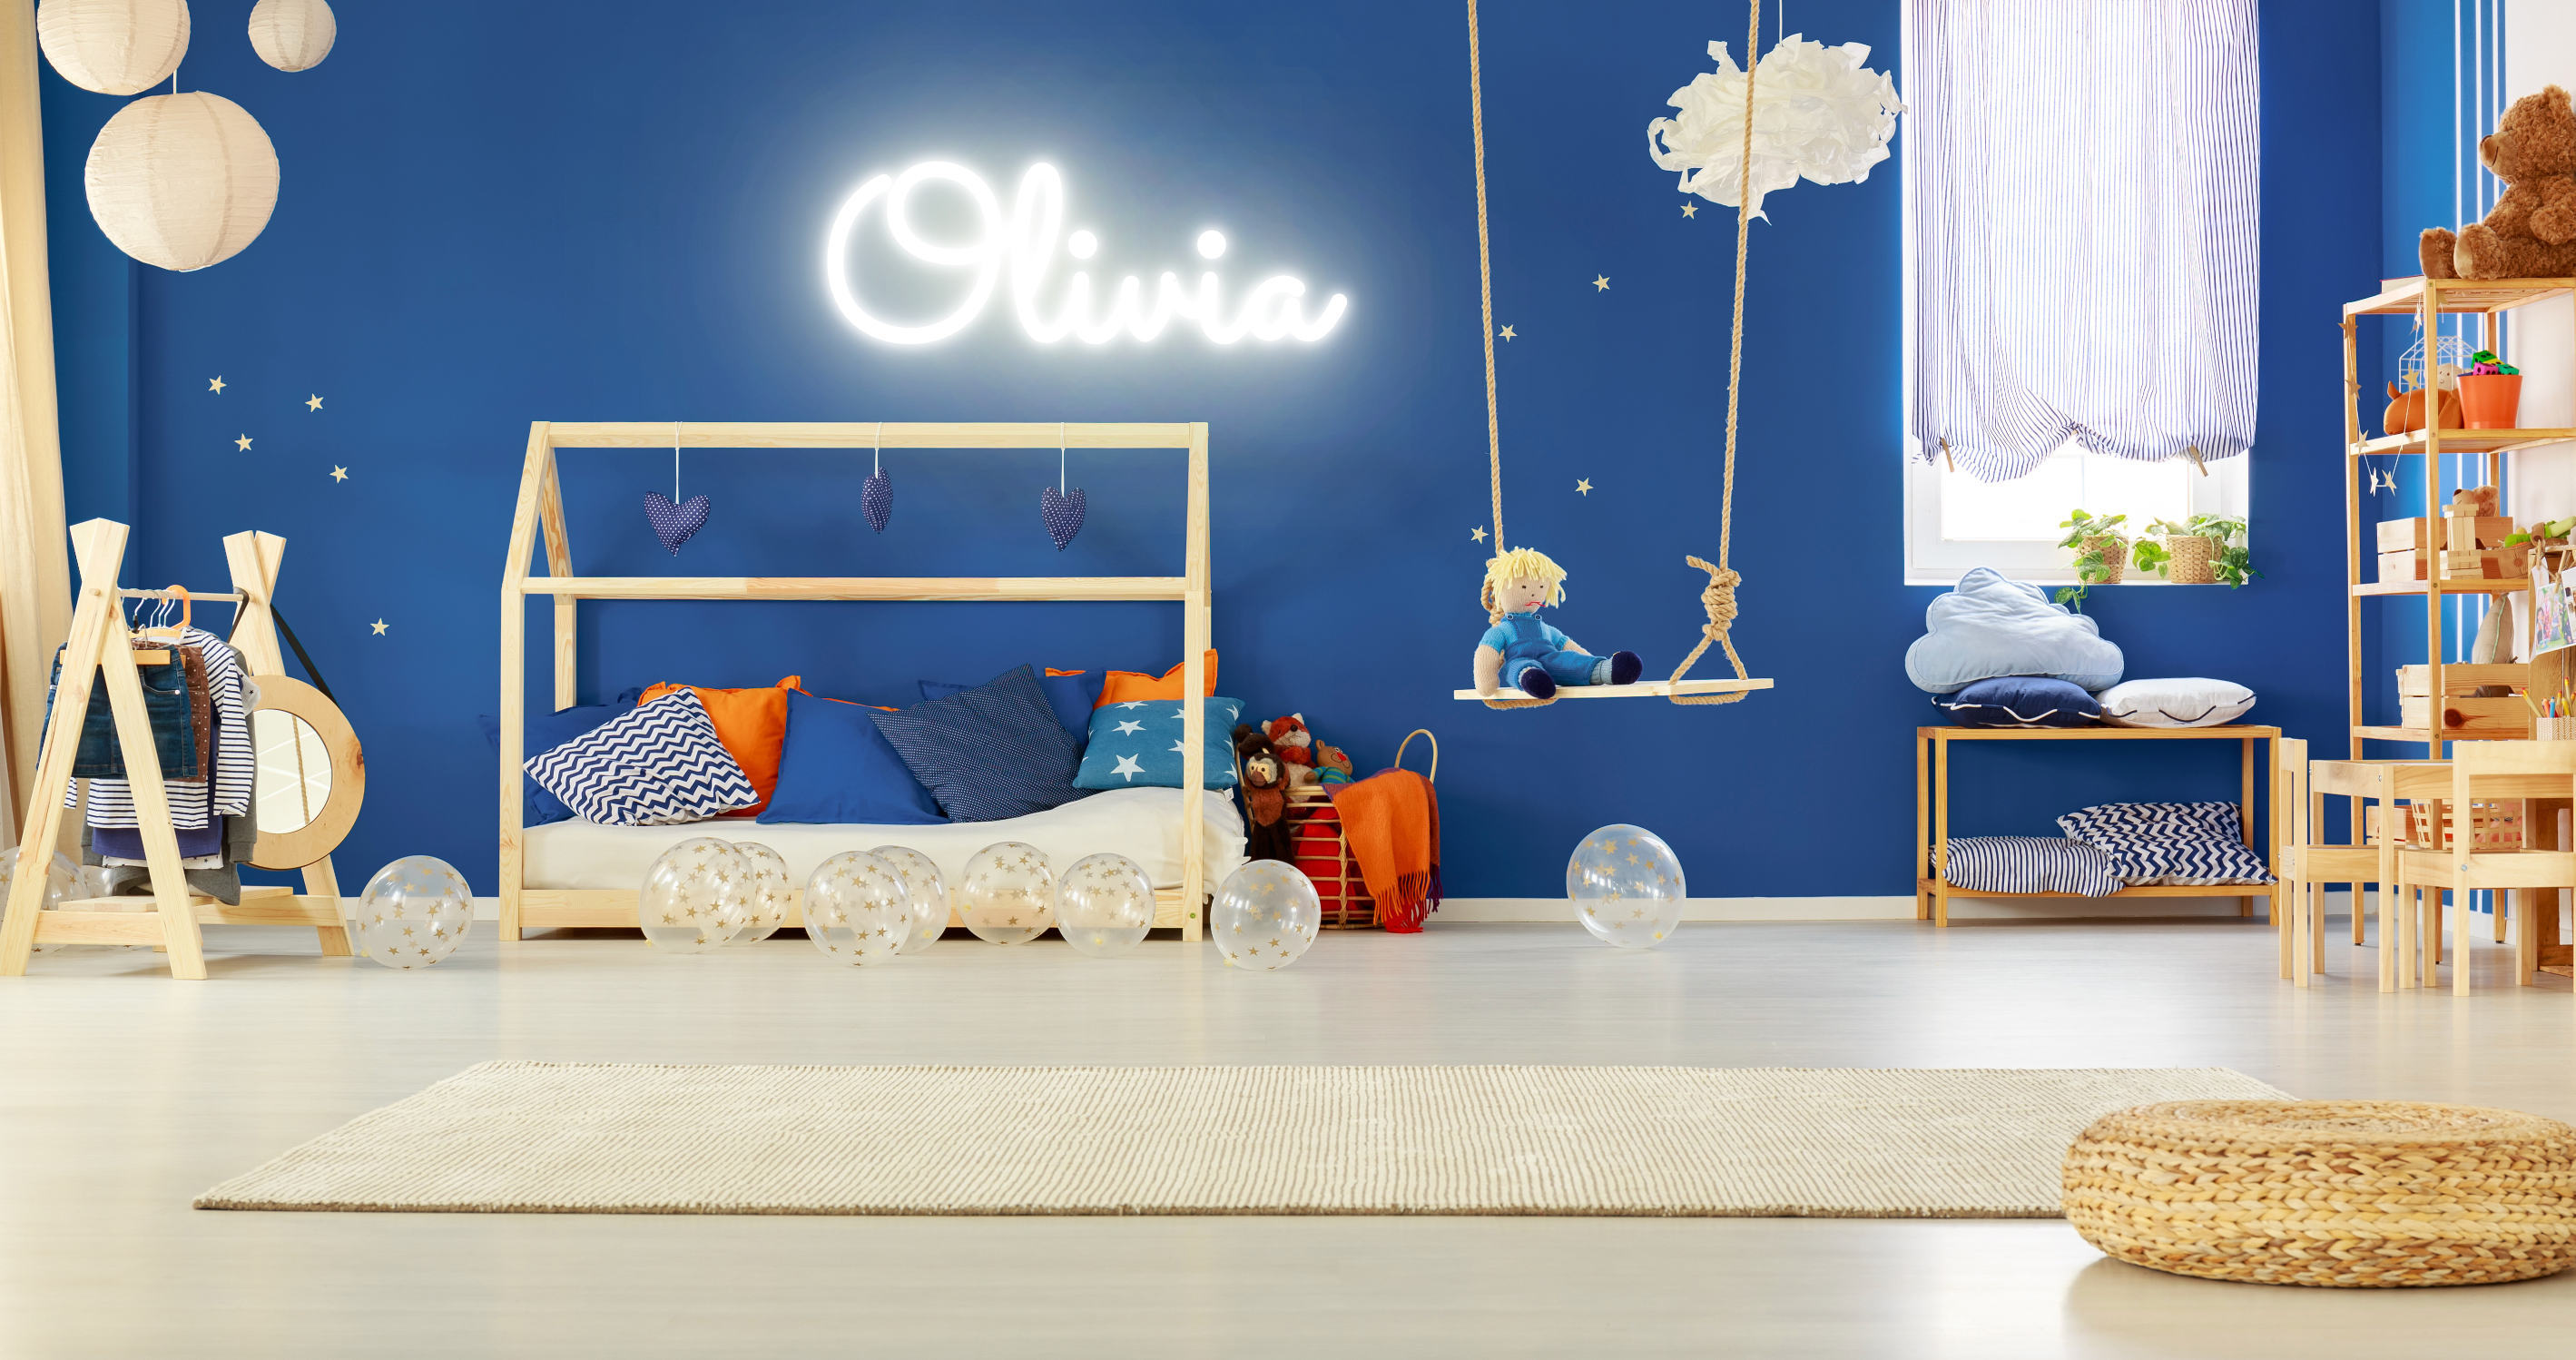 "Olivia" Baby Name LED Neon Sign